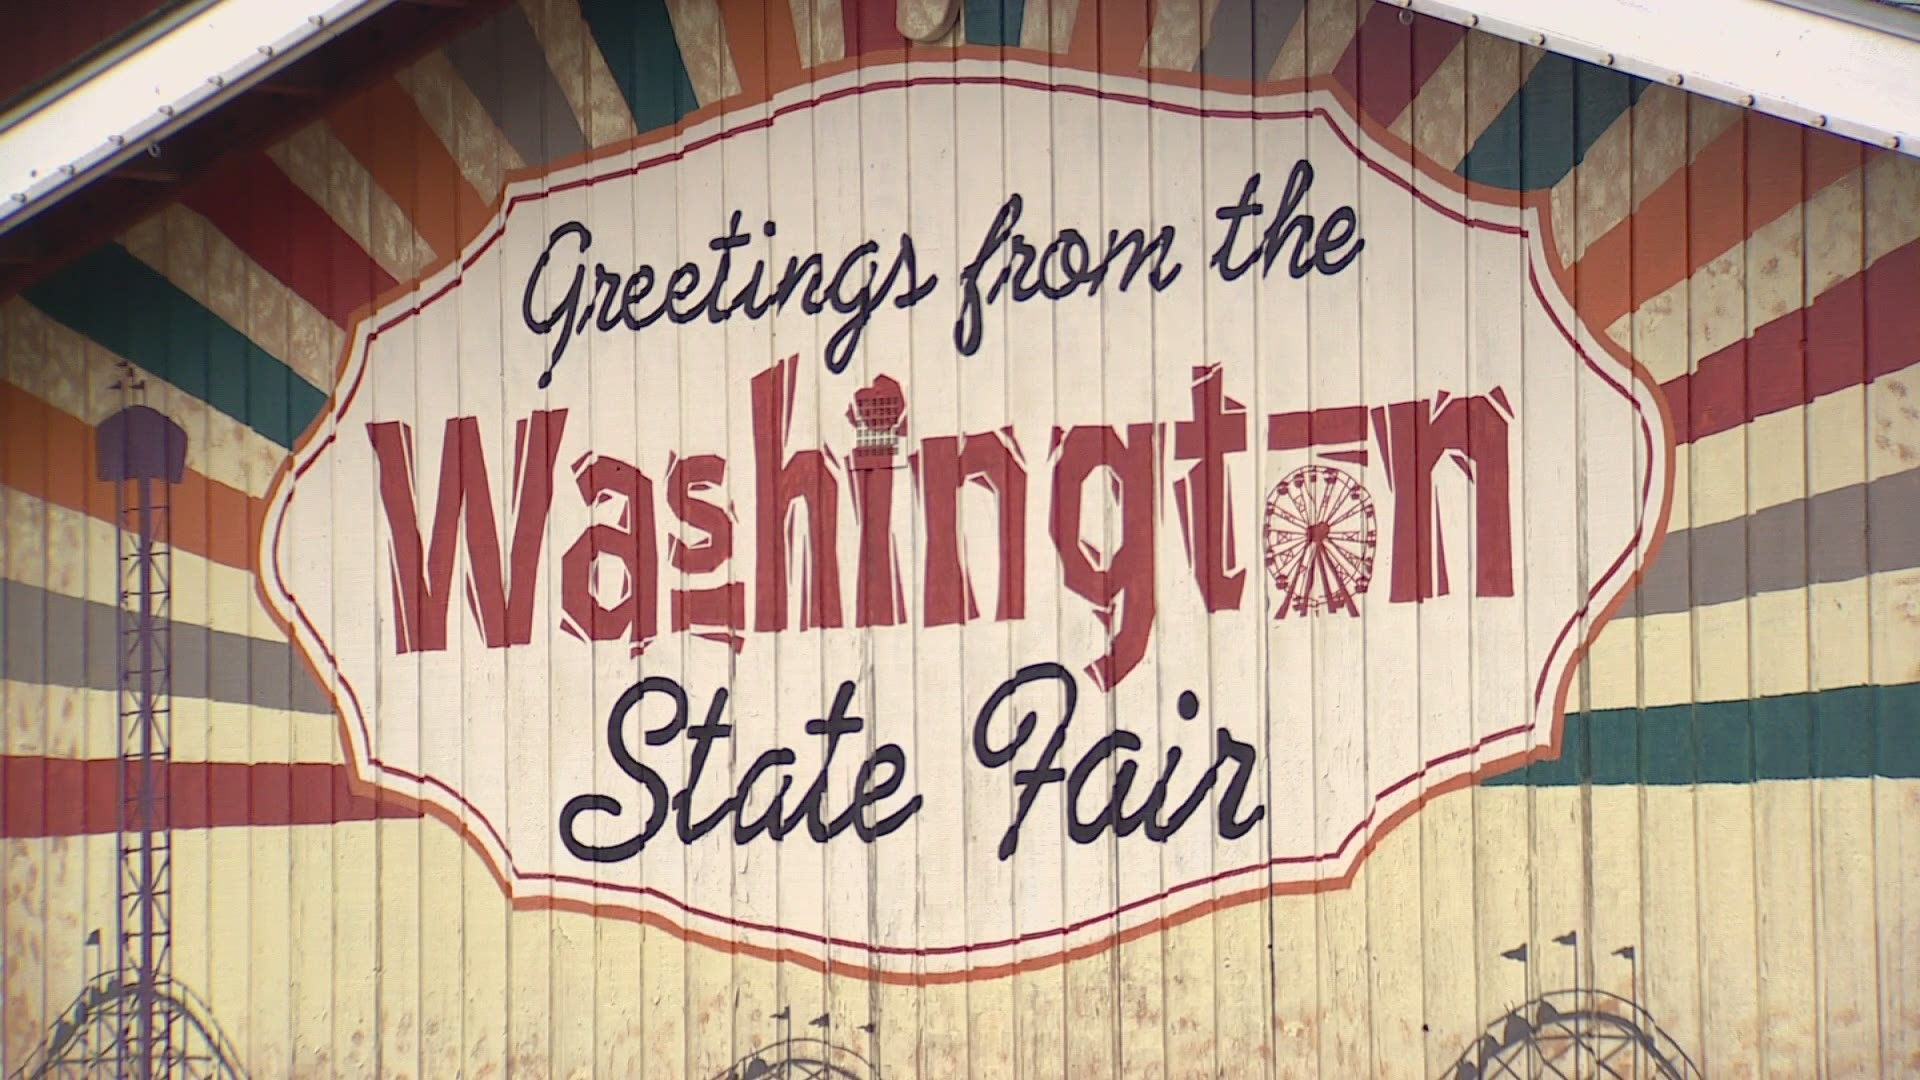 Washington State Fair officials say they're having difficulty fully staffing for the event which is reopening after taking 2020 off.